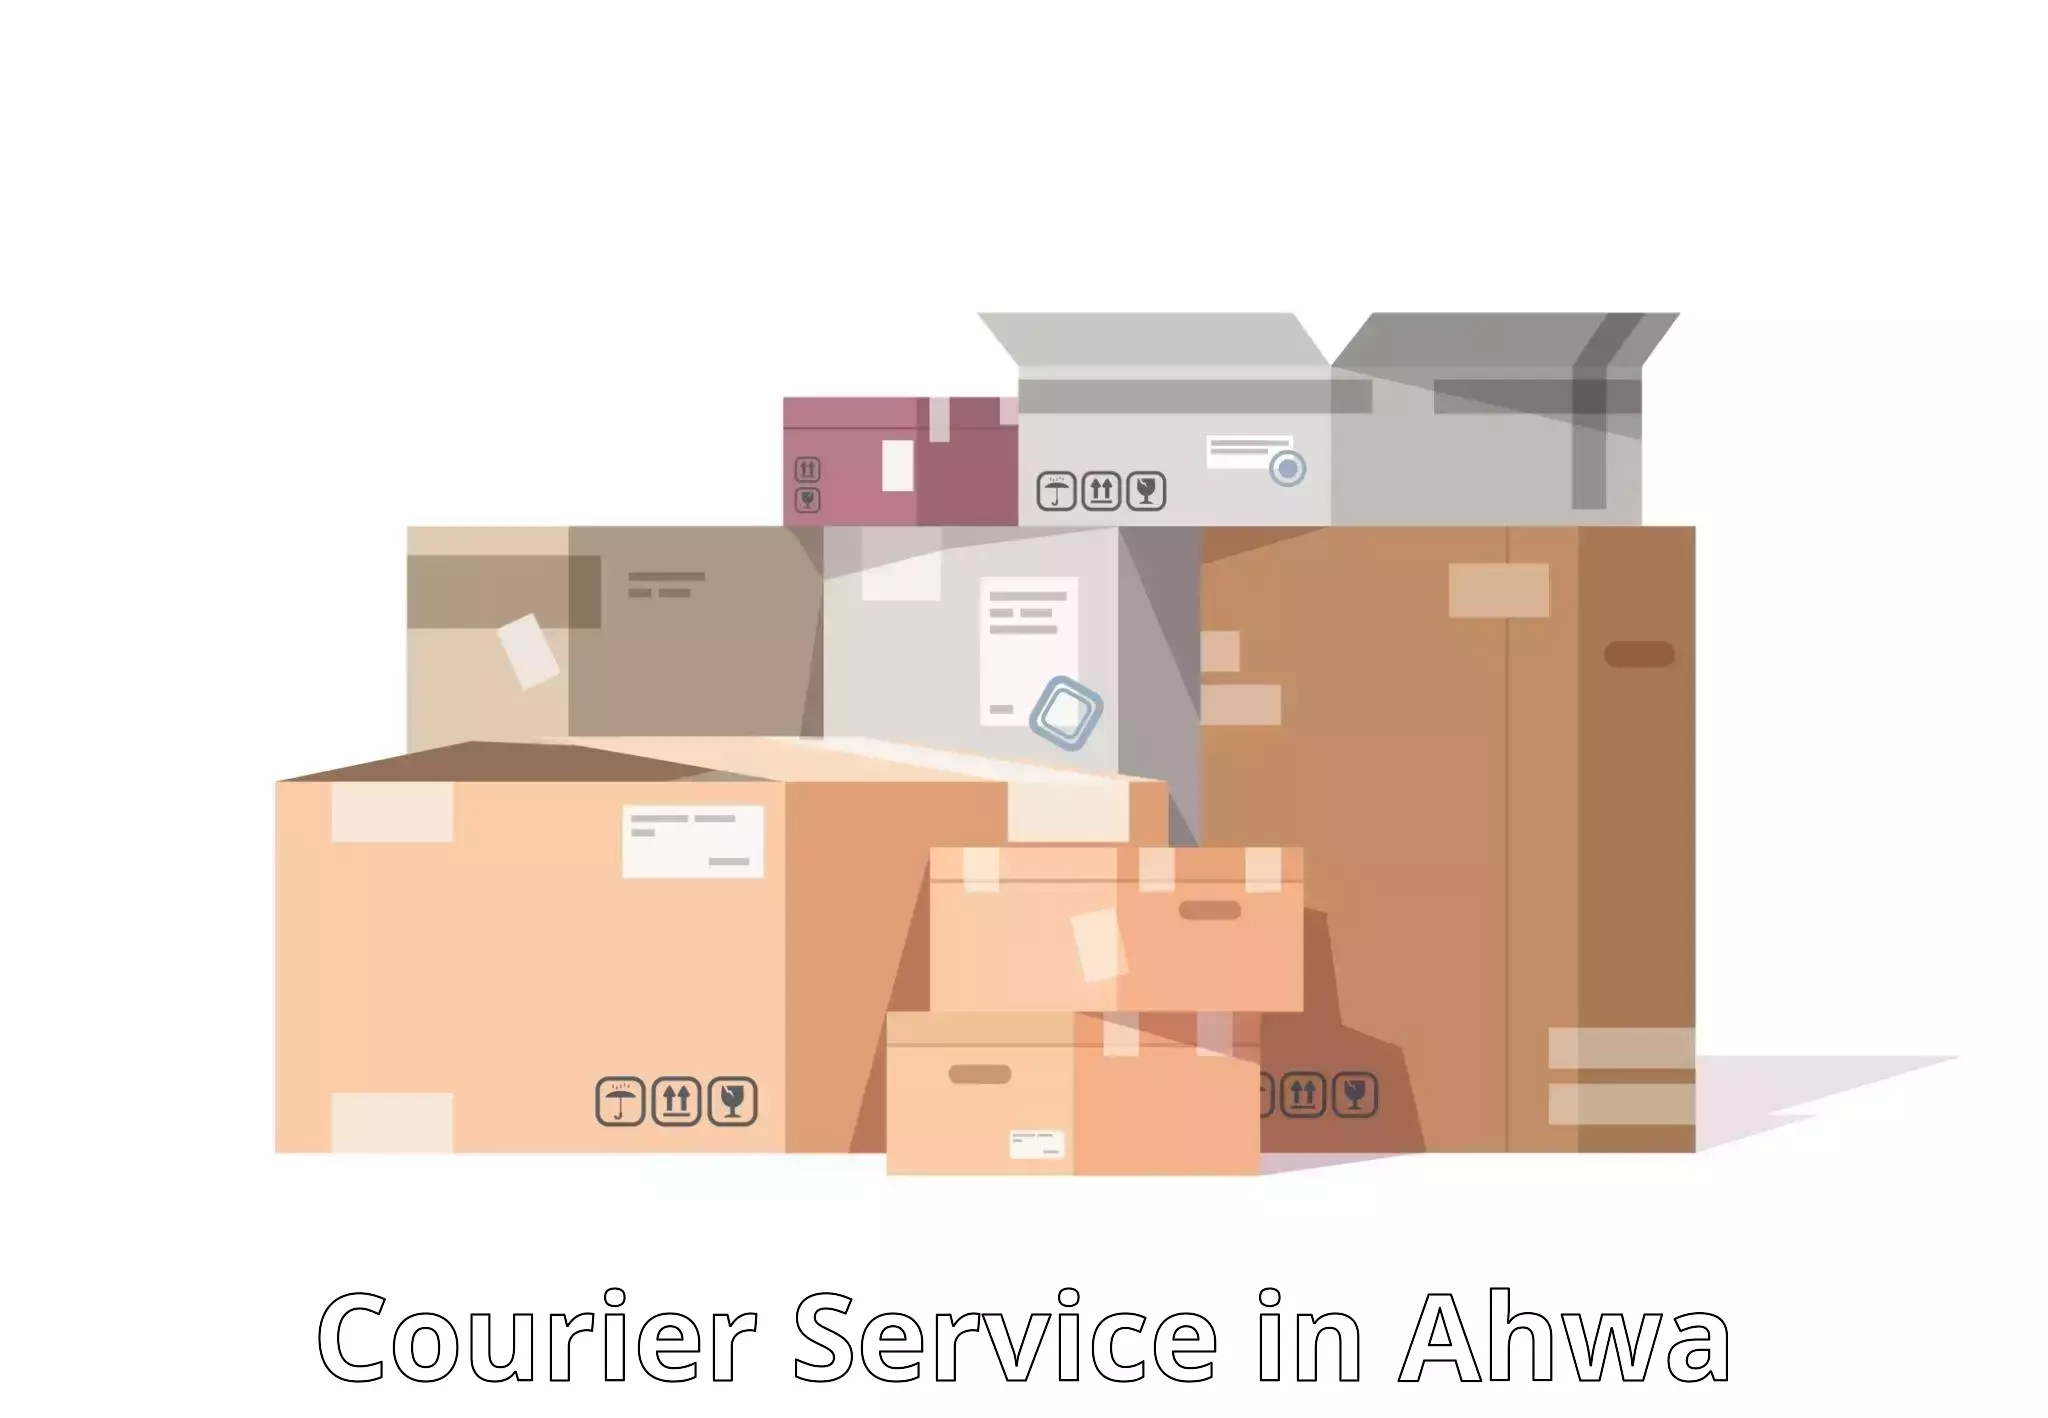 Short distance delivery in Ahwa